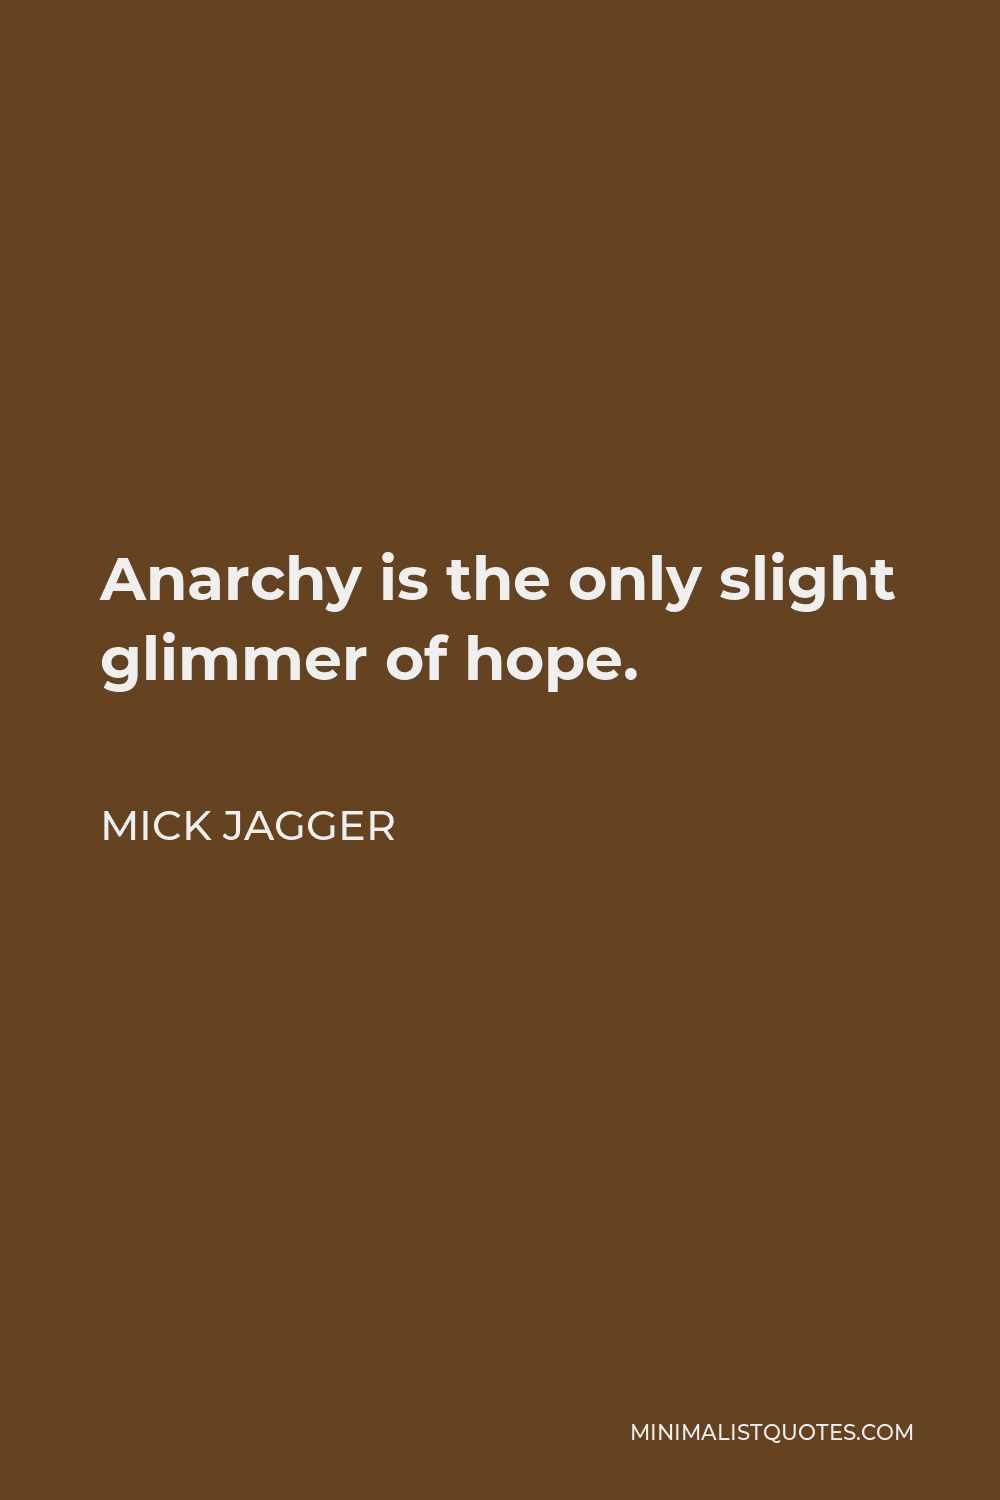 Mick Jagger Quote - Anarchy is the only slight glimmer of hope.